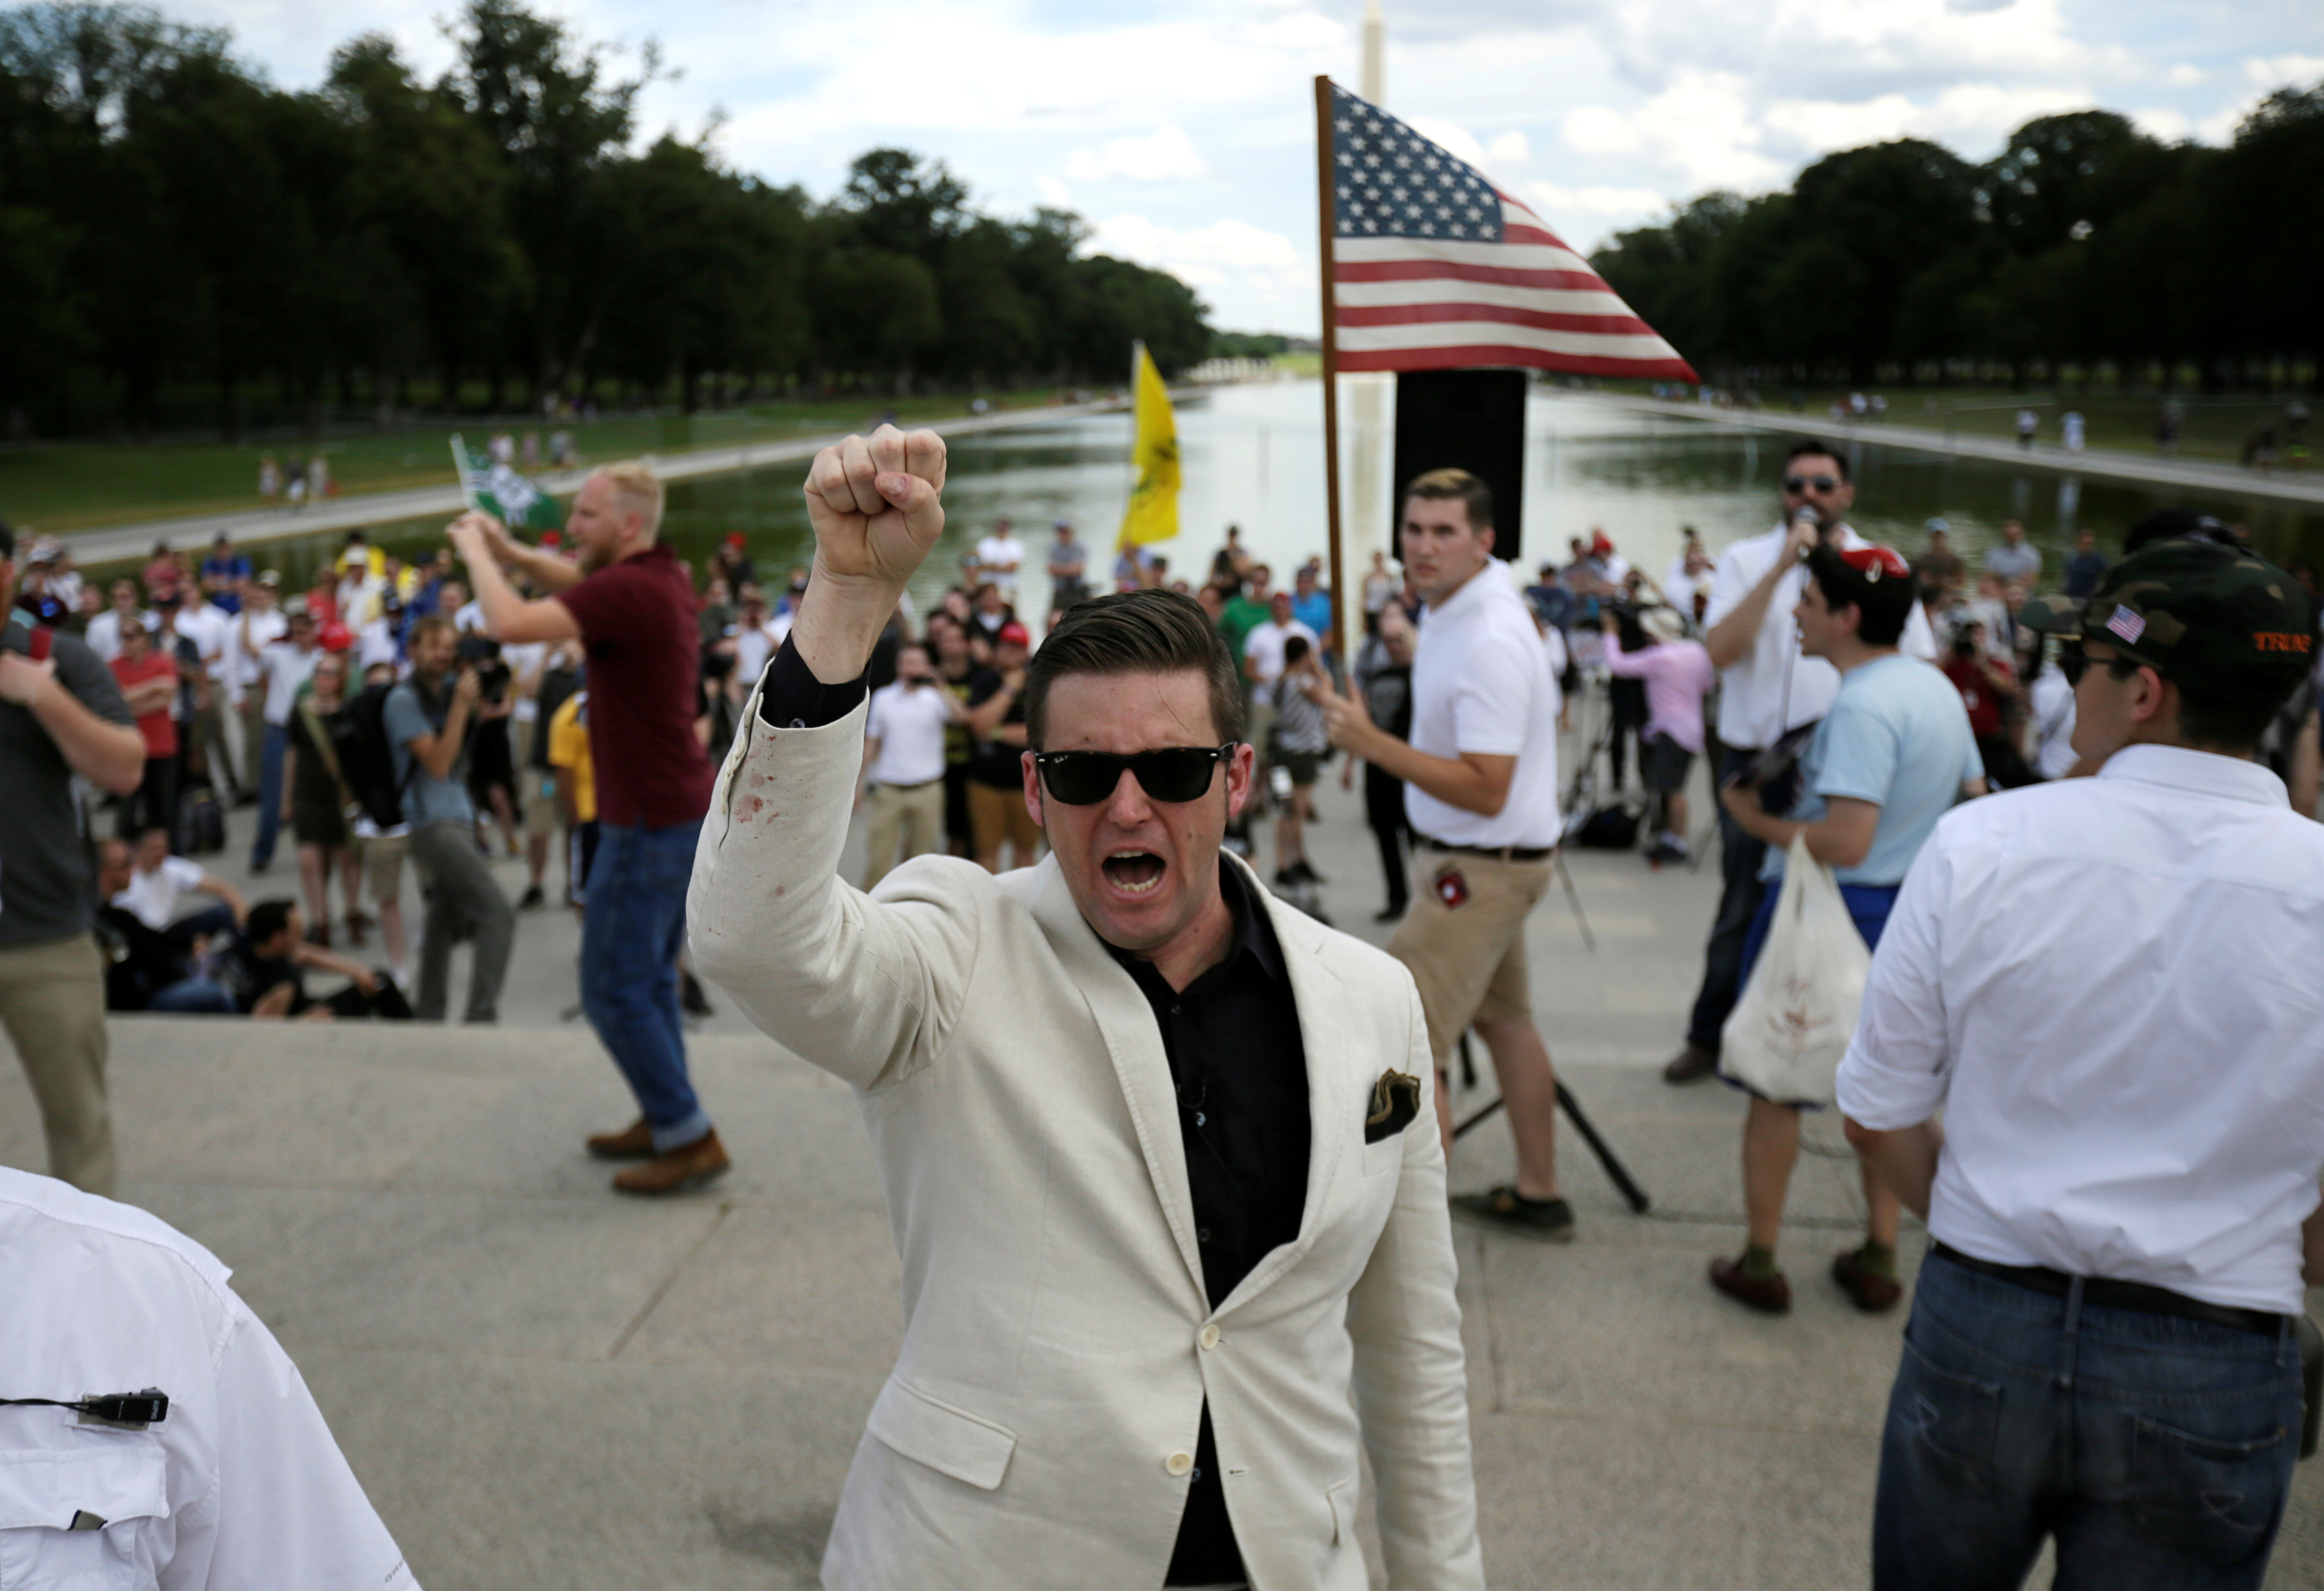 Richard Spencer at the Free Speech Rally in Washington, DC